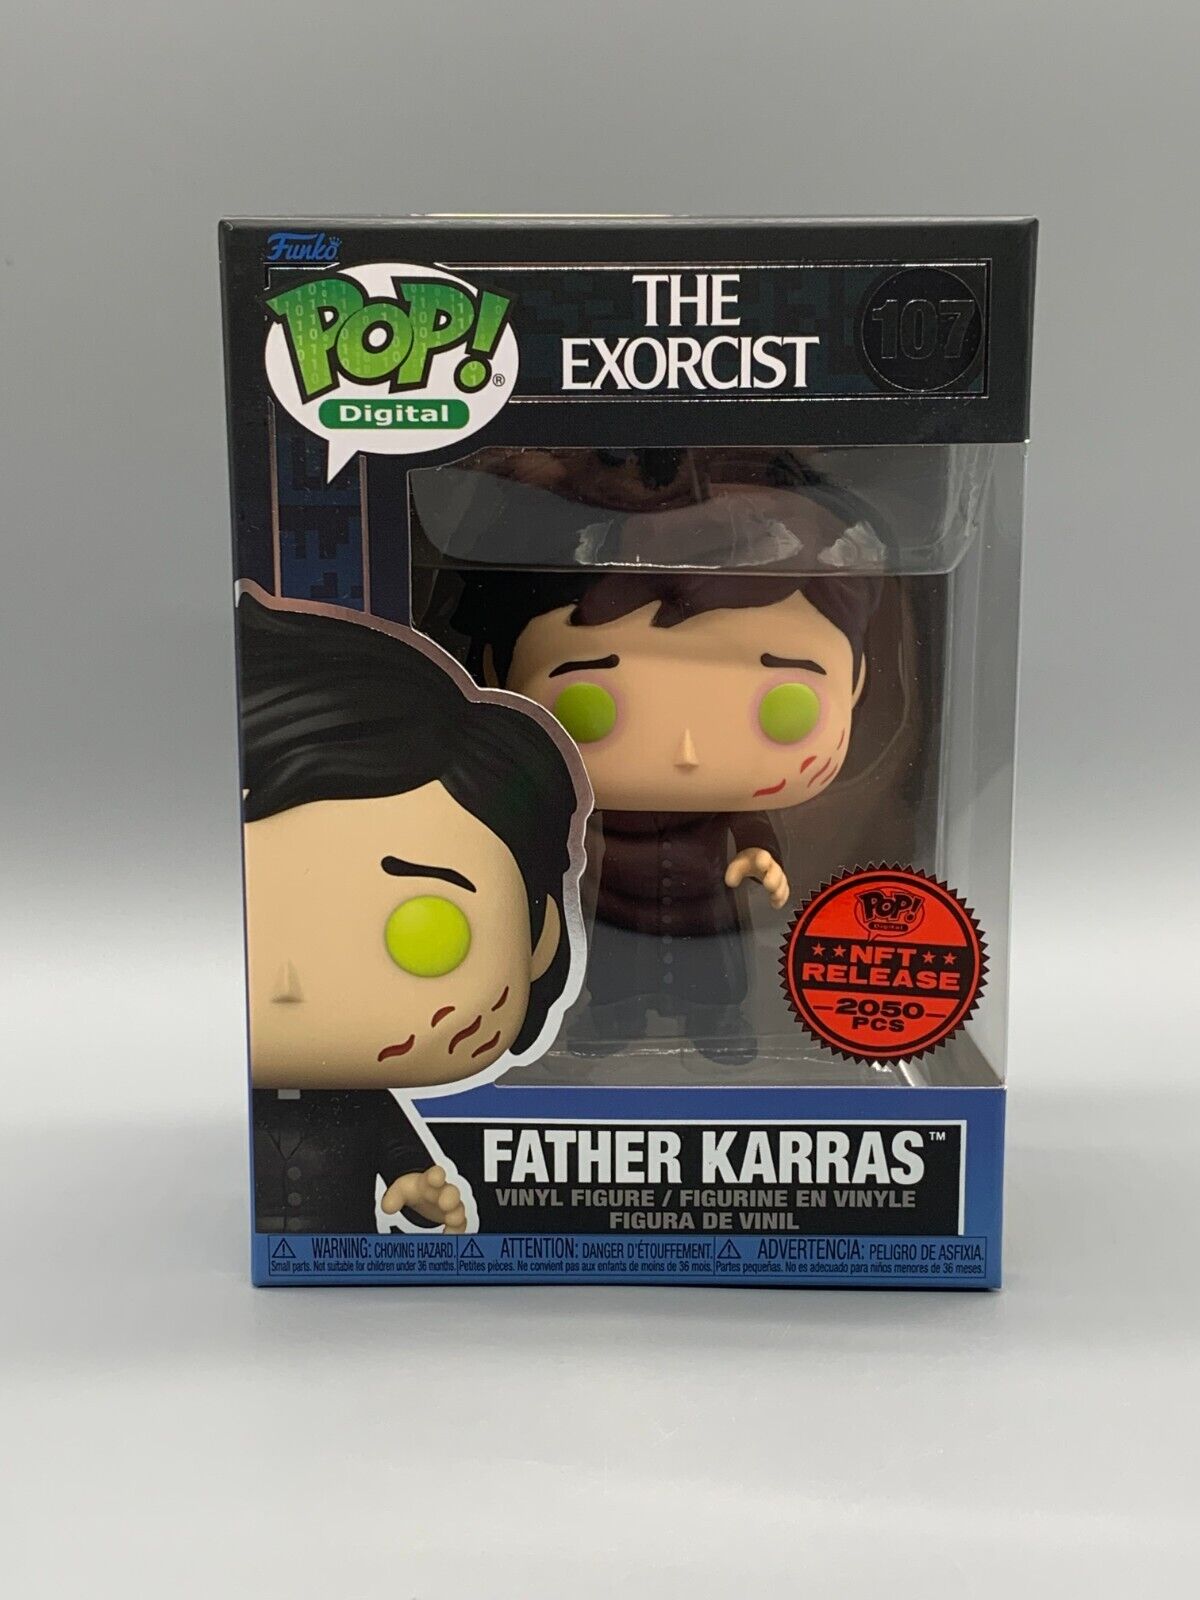 FUNKO POP #107 FATHER KARRAS THE EXORCIST *LE 2050* N FT EXCLUSIVE W/ PROTECTOR